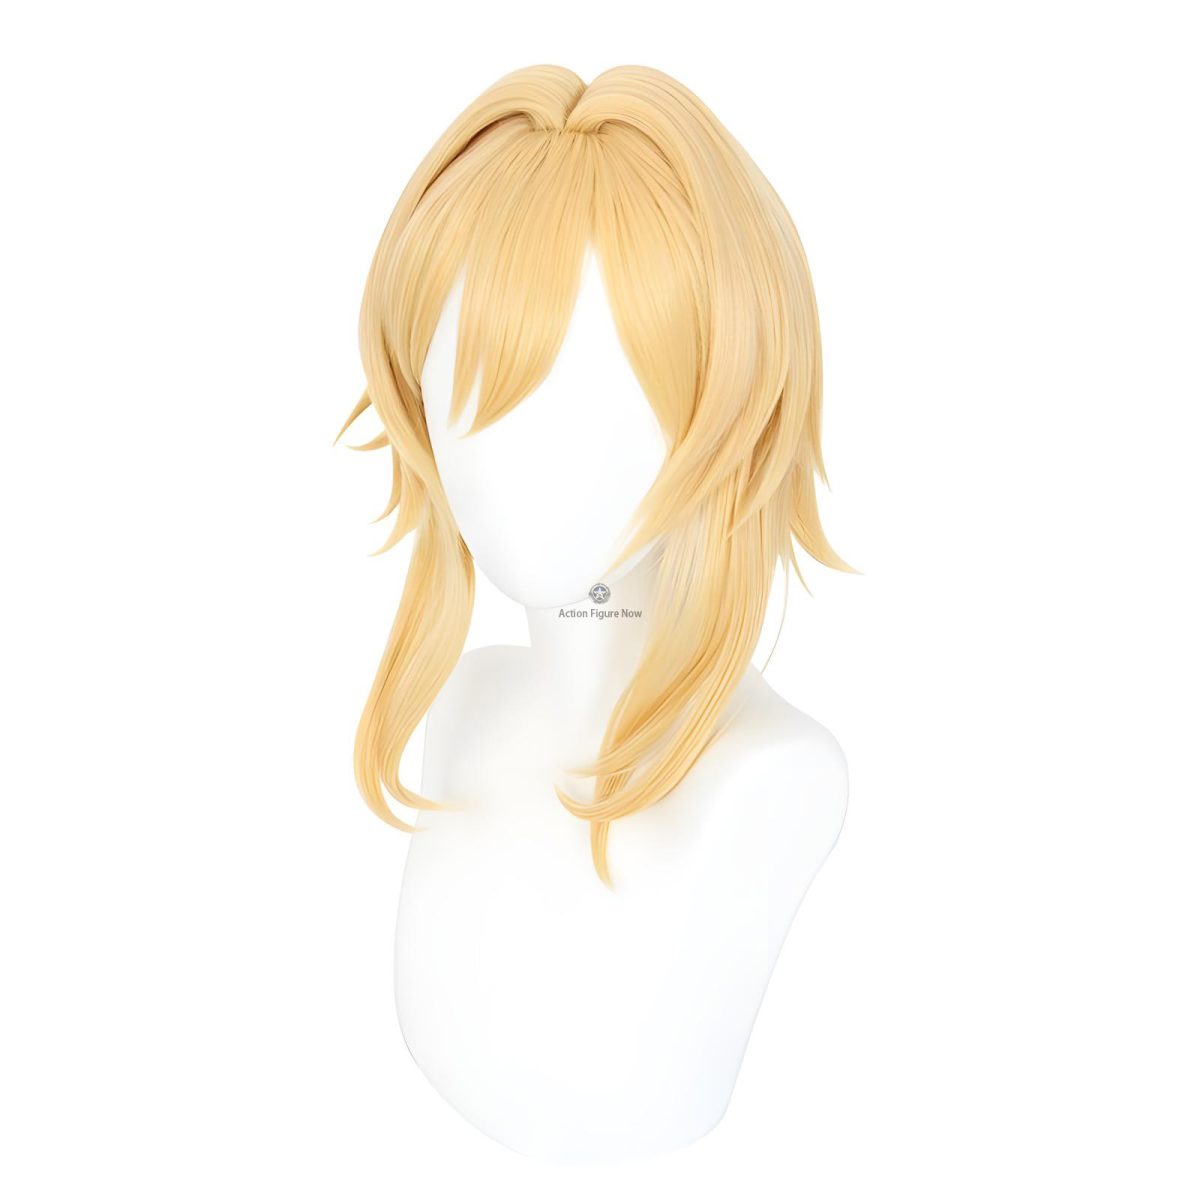 Genshin Impact Lumine Cosplay Wig - Golden Blonde Goddess Hair Wig with Pink Clip on Hair Extension